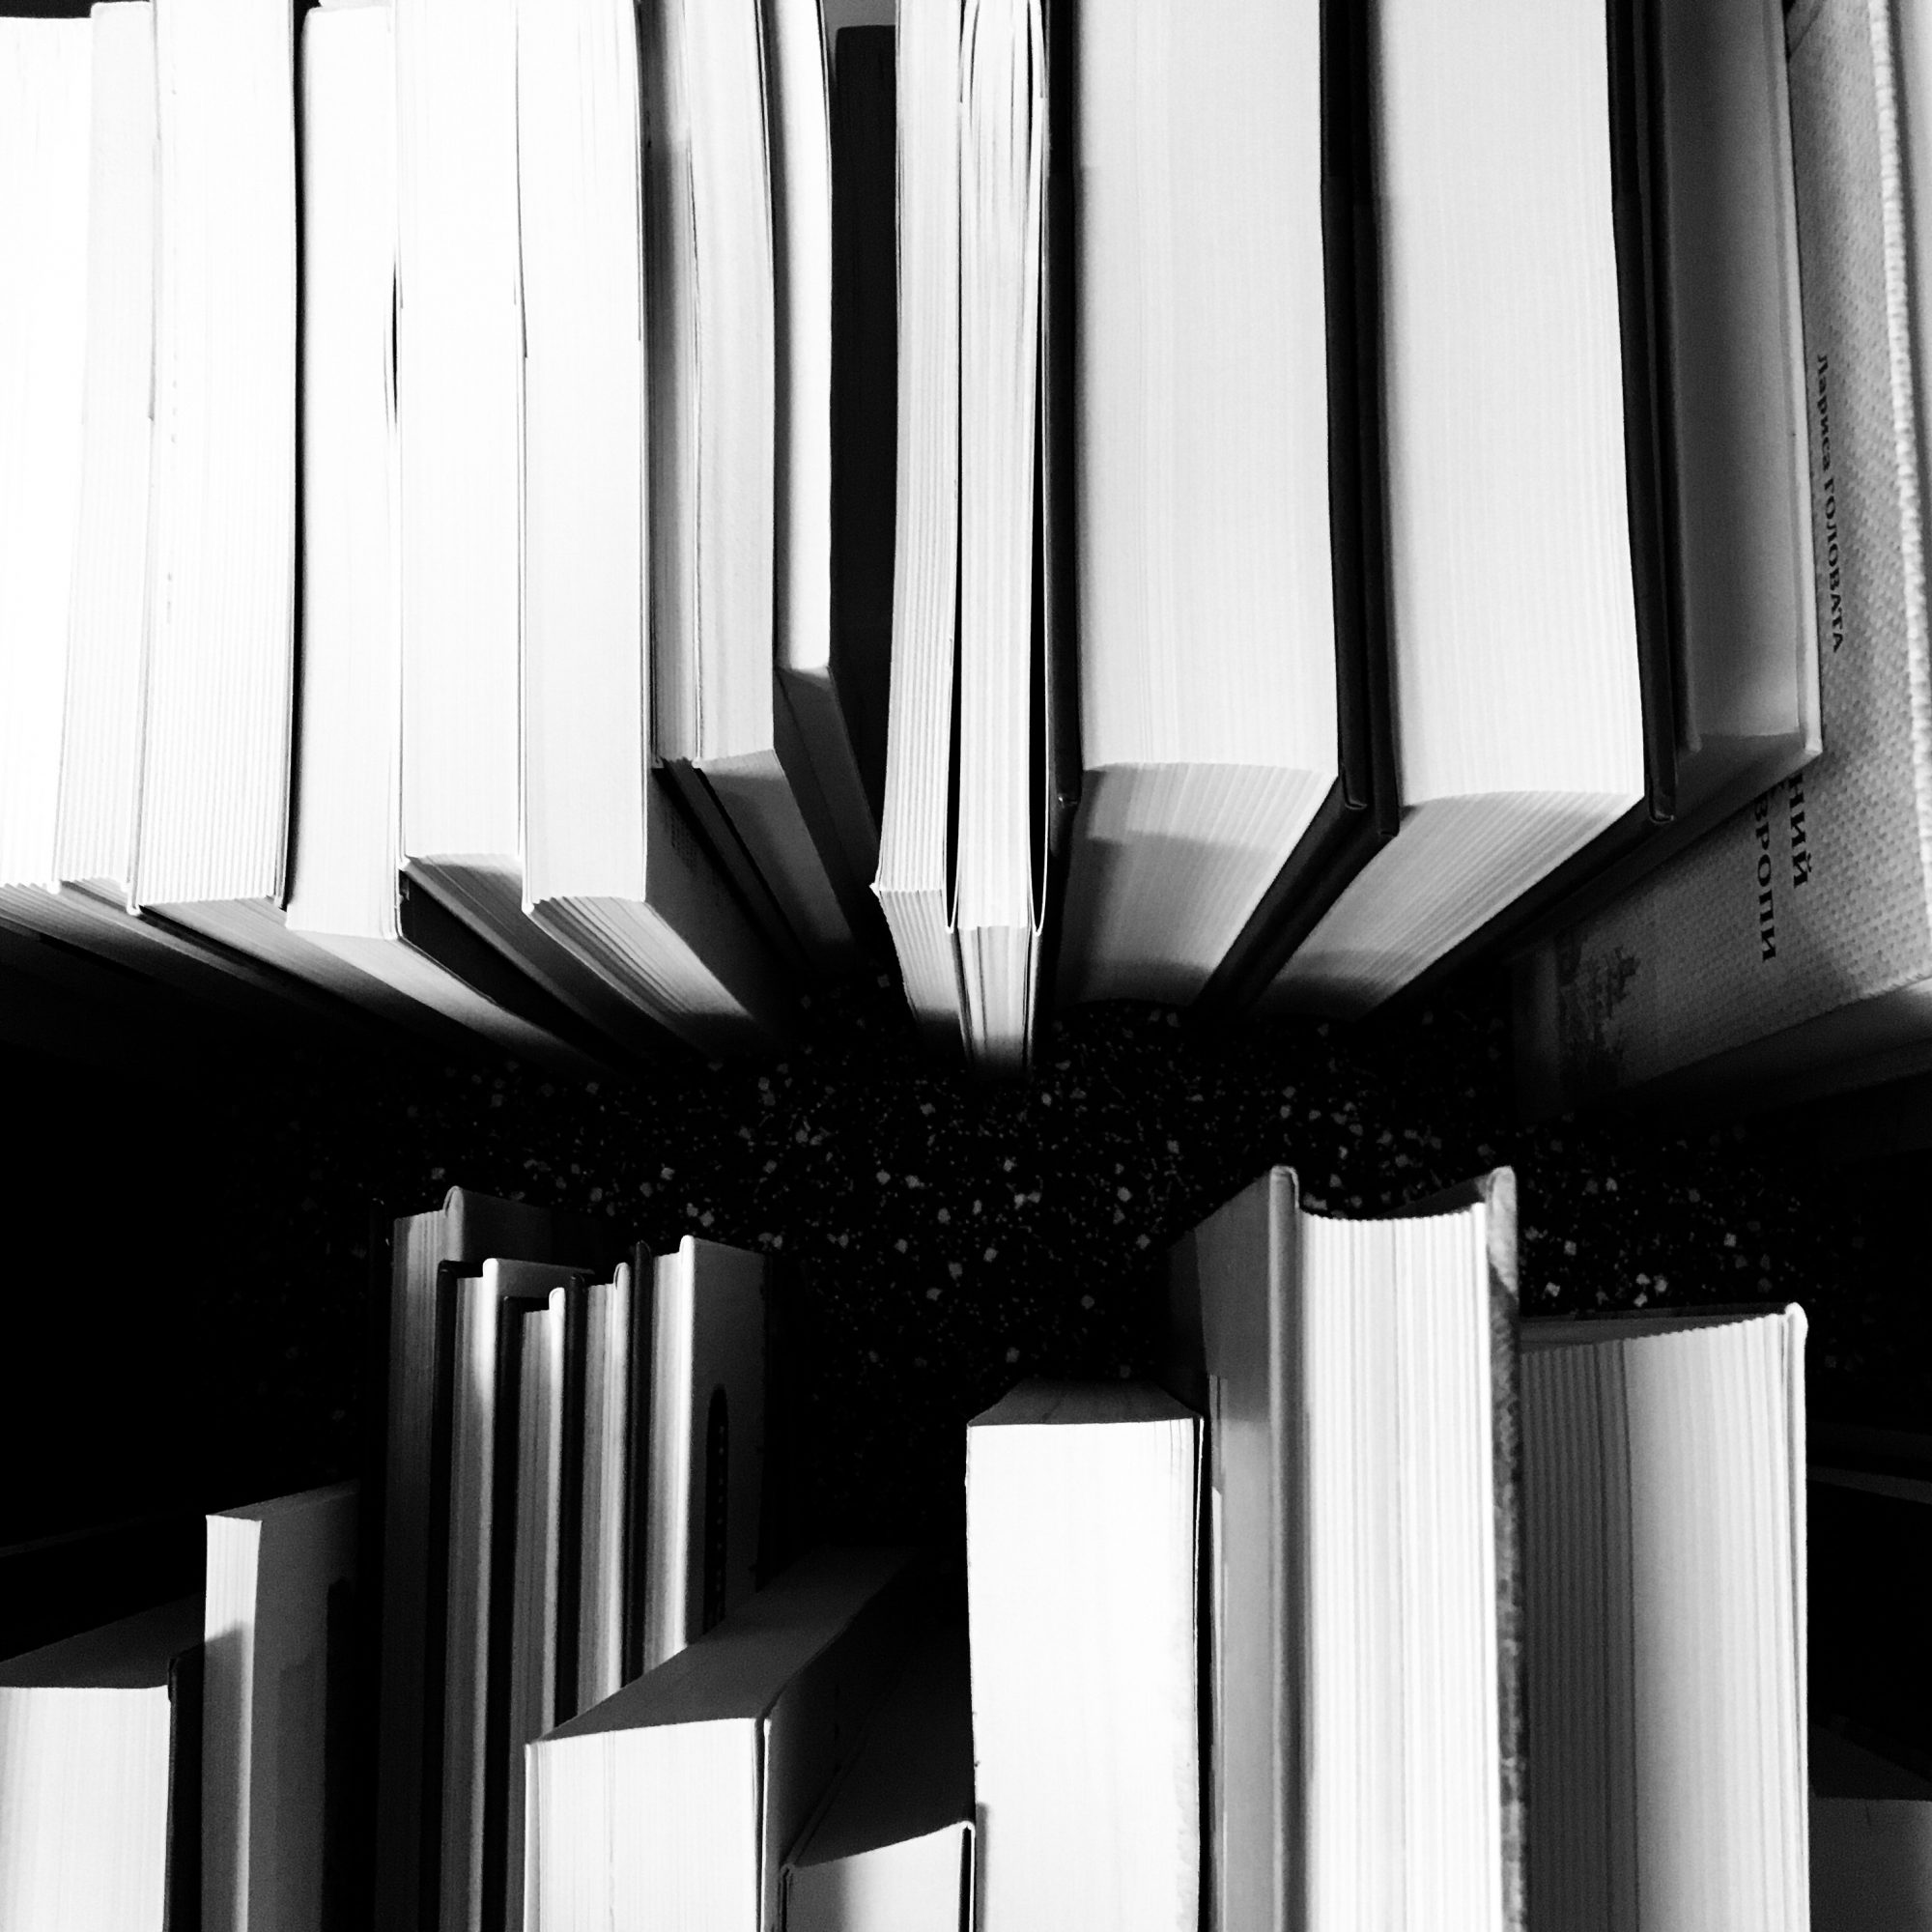 A black and white photo of books